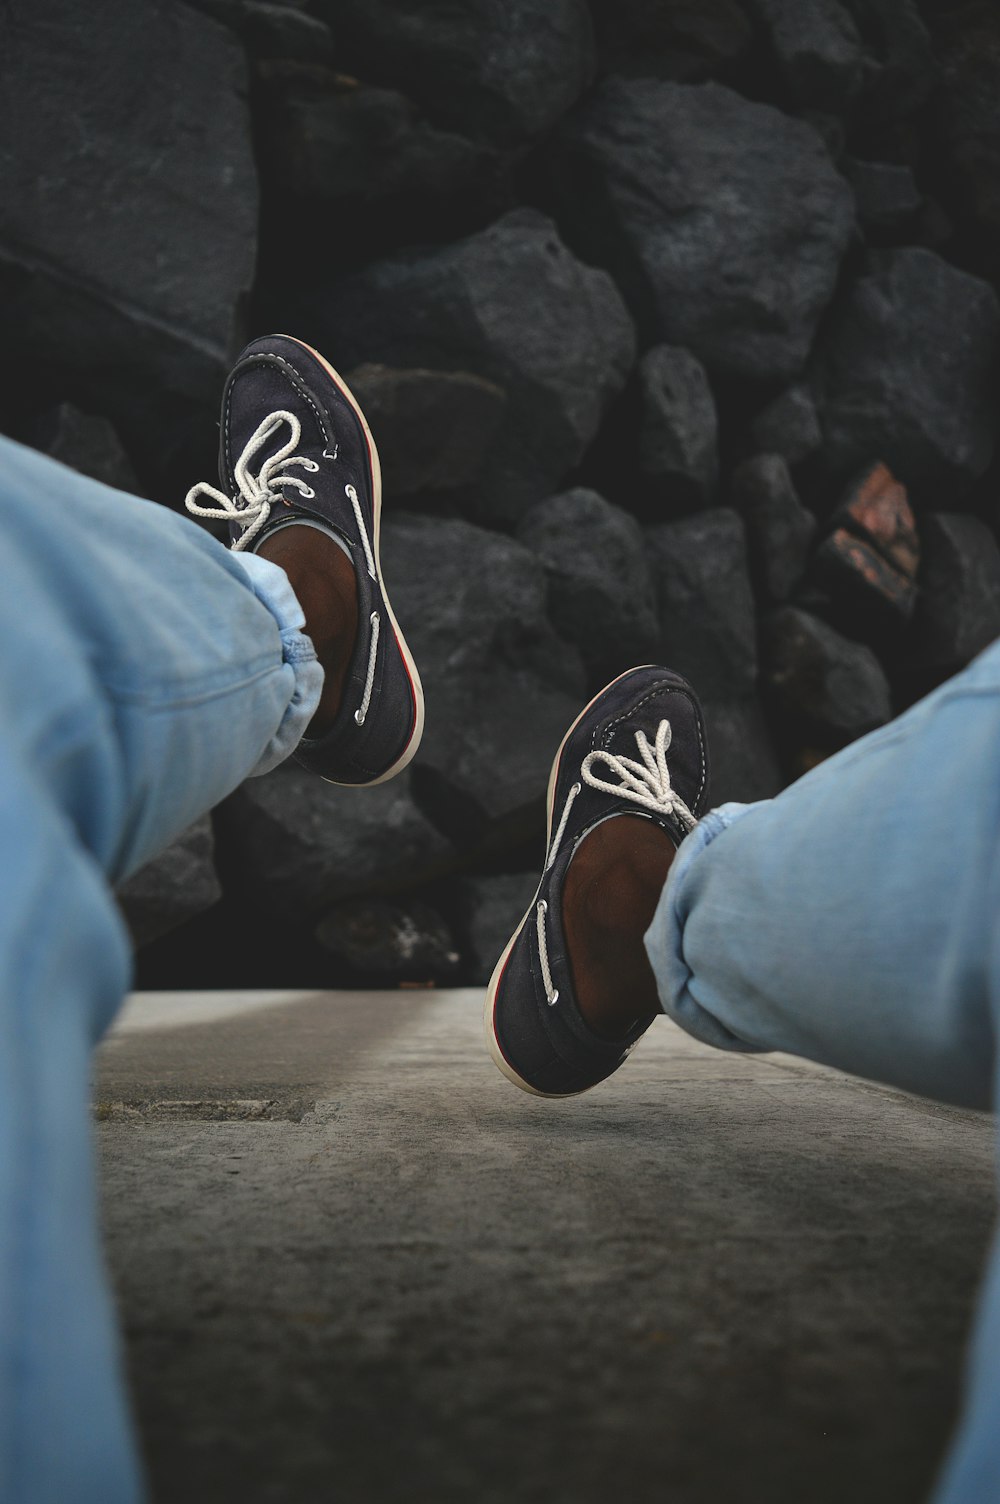 person wearing blue boat shoes